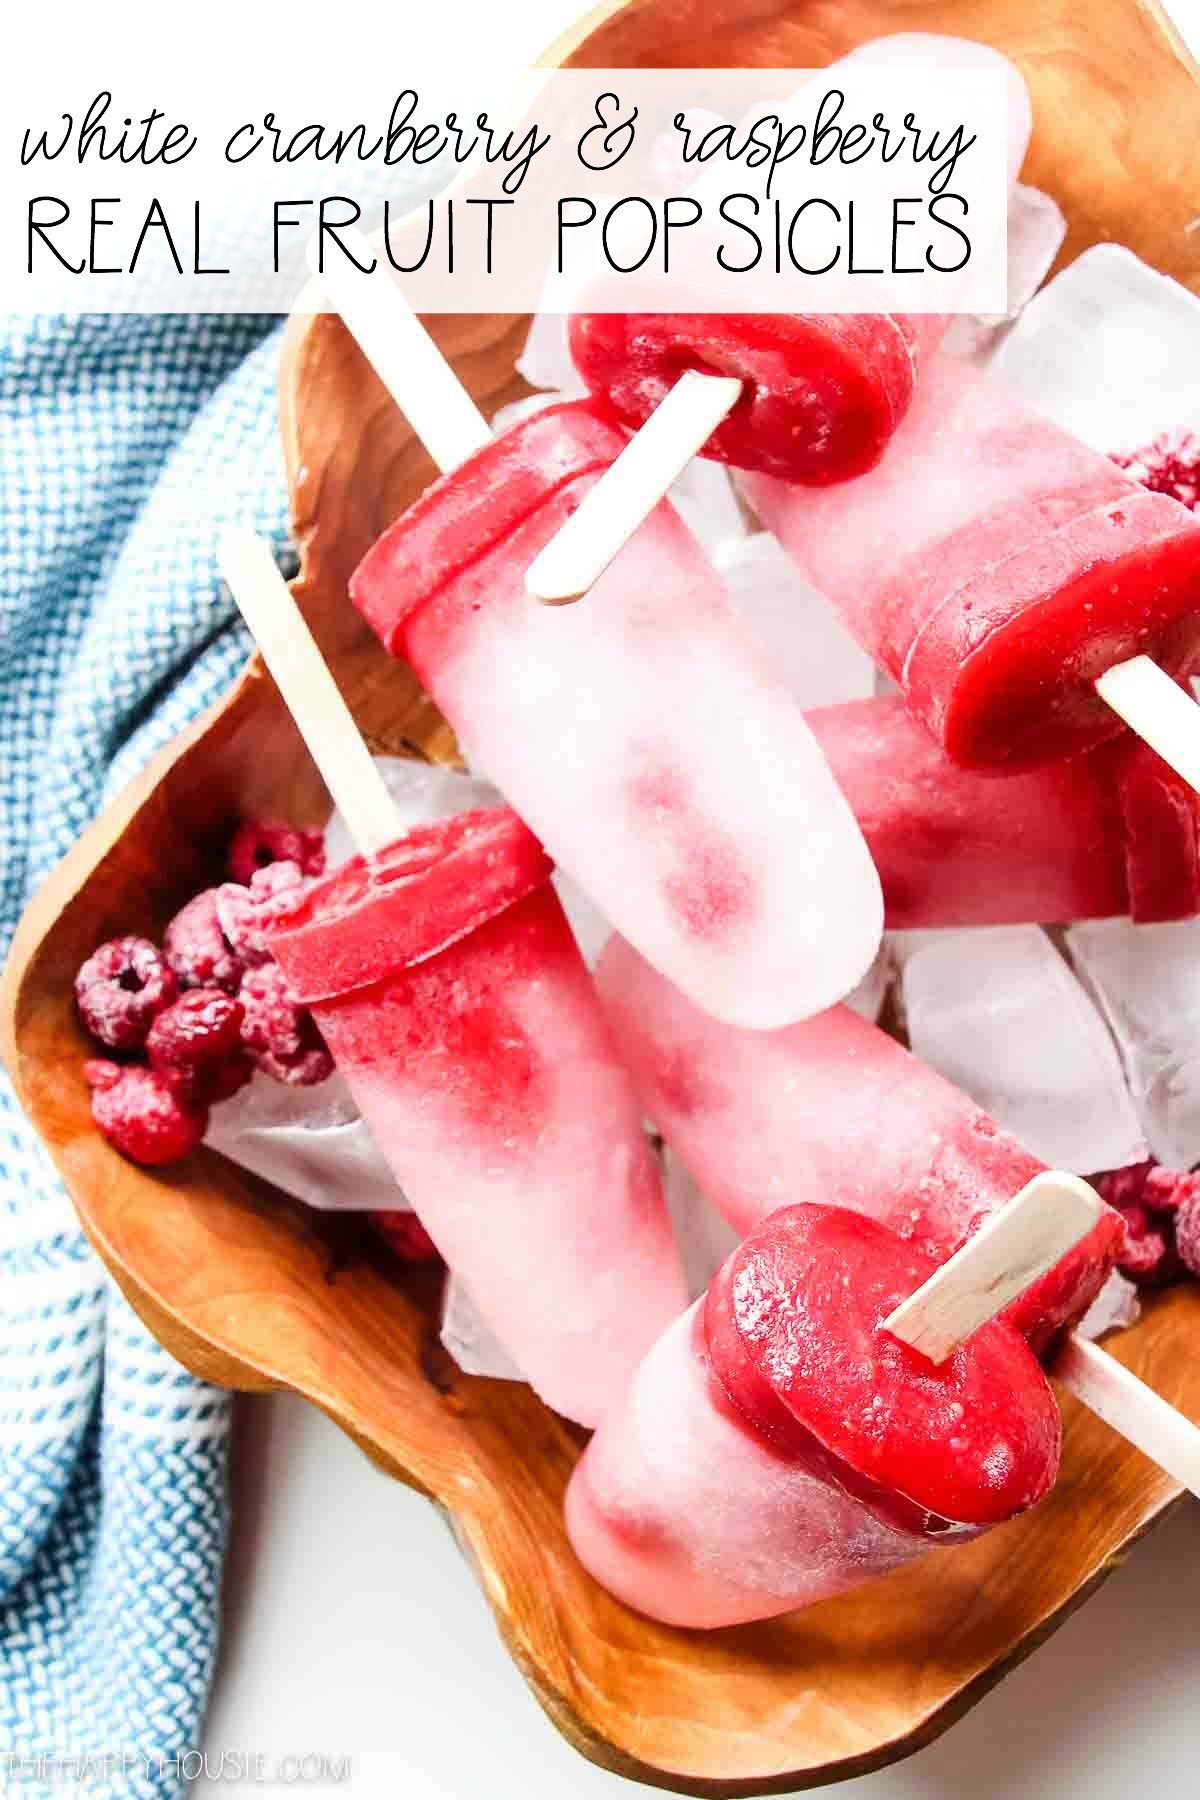 White Cranberry and Raspberry Real Fruit Popsicles graphic.